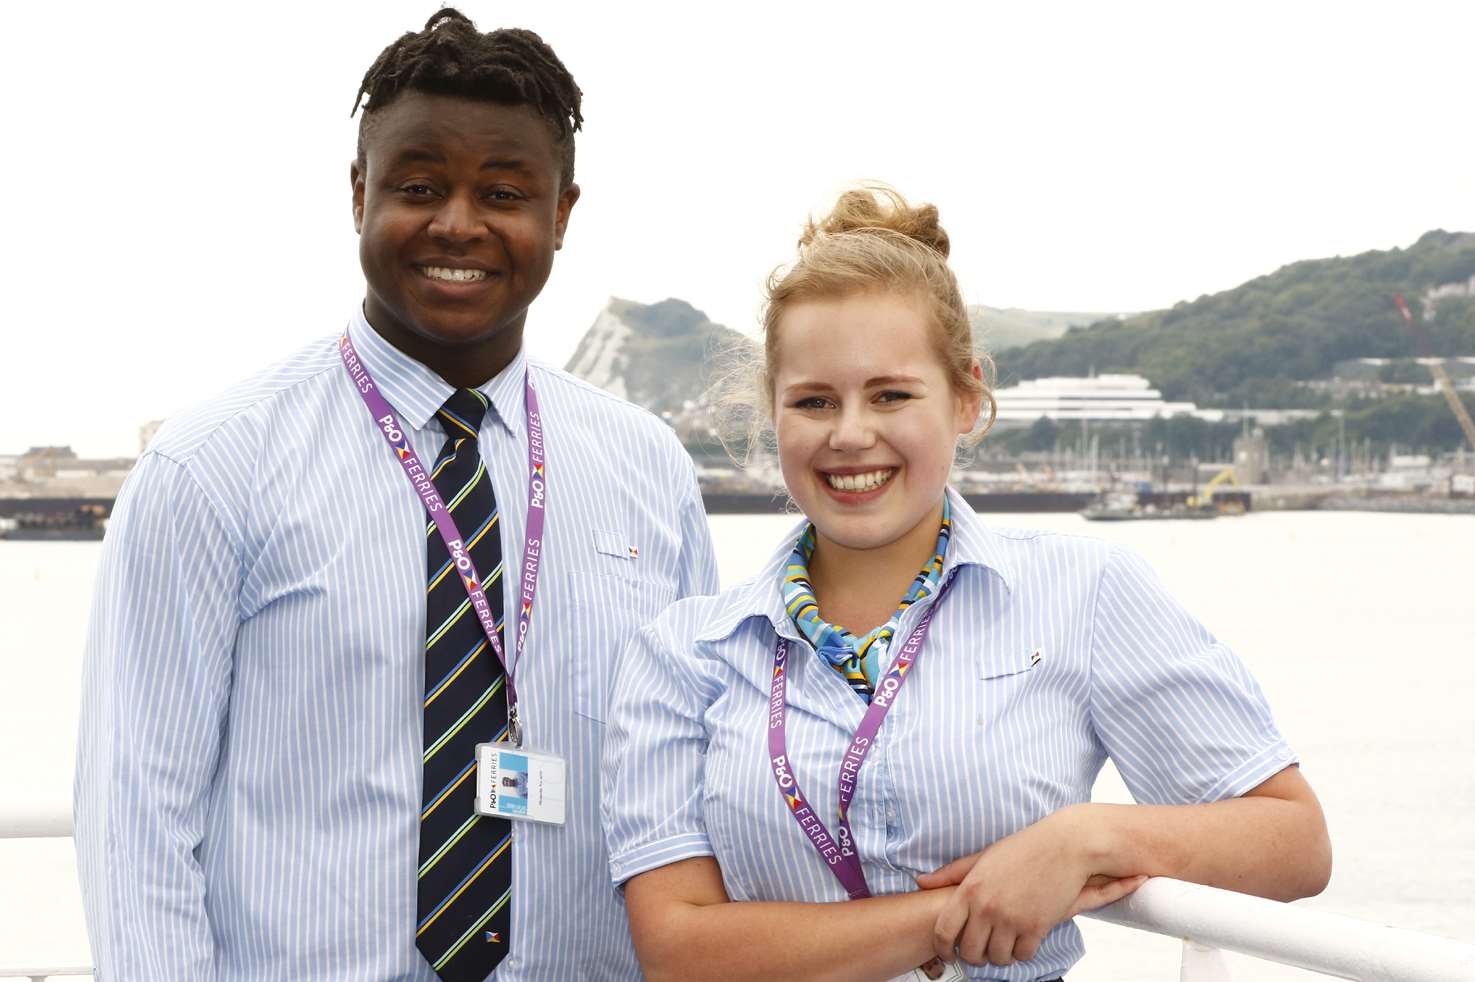 Two of P&O Ferries' new summer recruits. Munashe Navarro, 21, of Dover, and Ellie Cox, 20, of Nonington. Picture courtesy of P&O Ferries